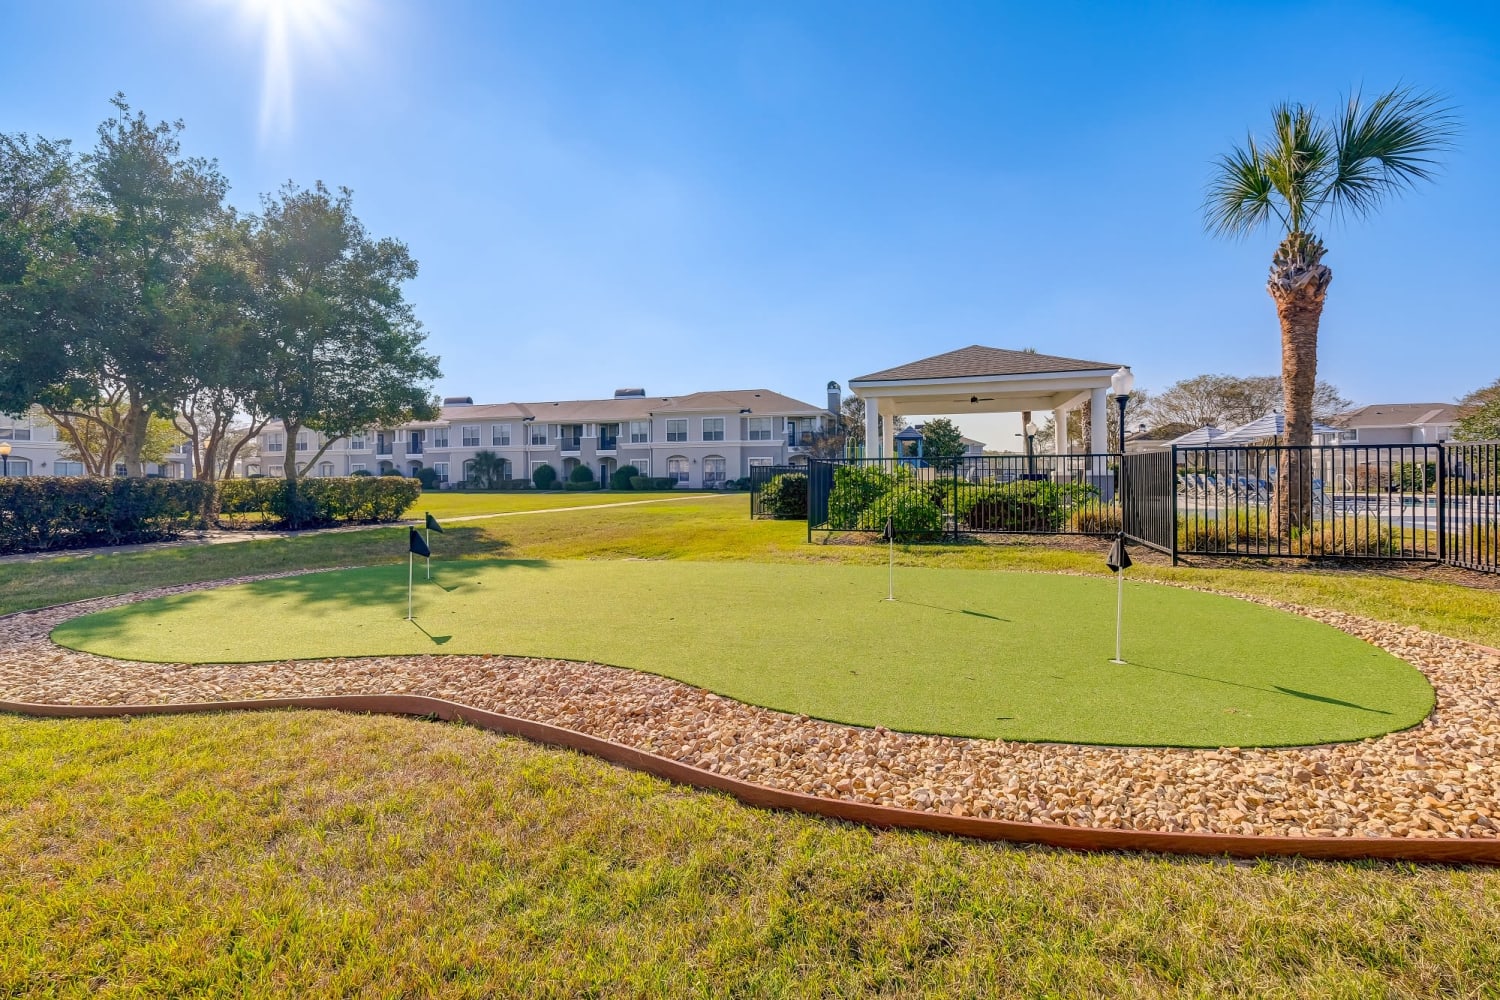 Putting green at Chateau des Lions Apartment Homes in Lafayette, Louisiana